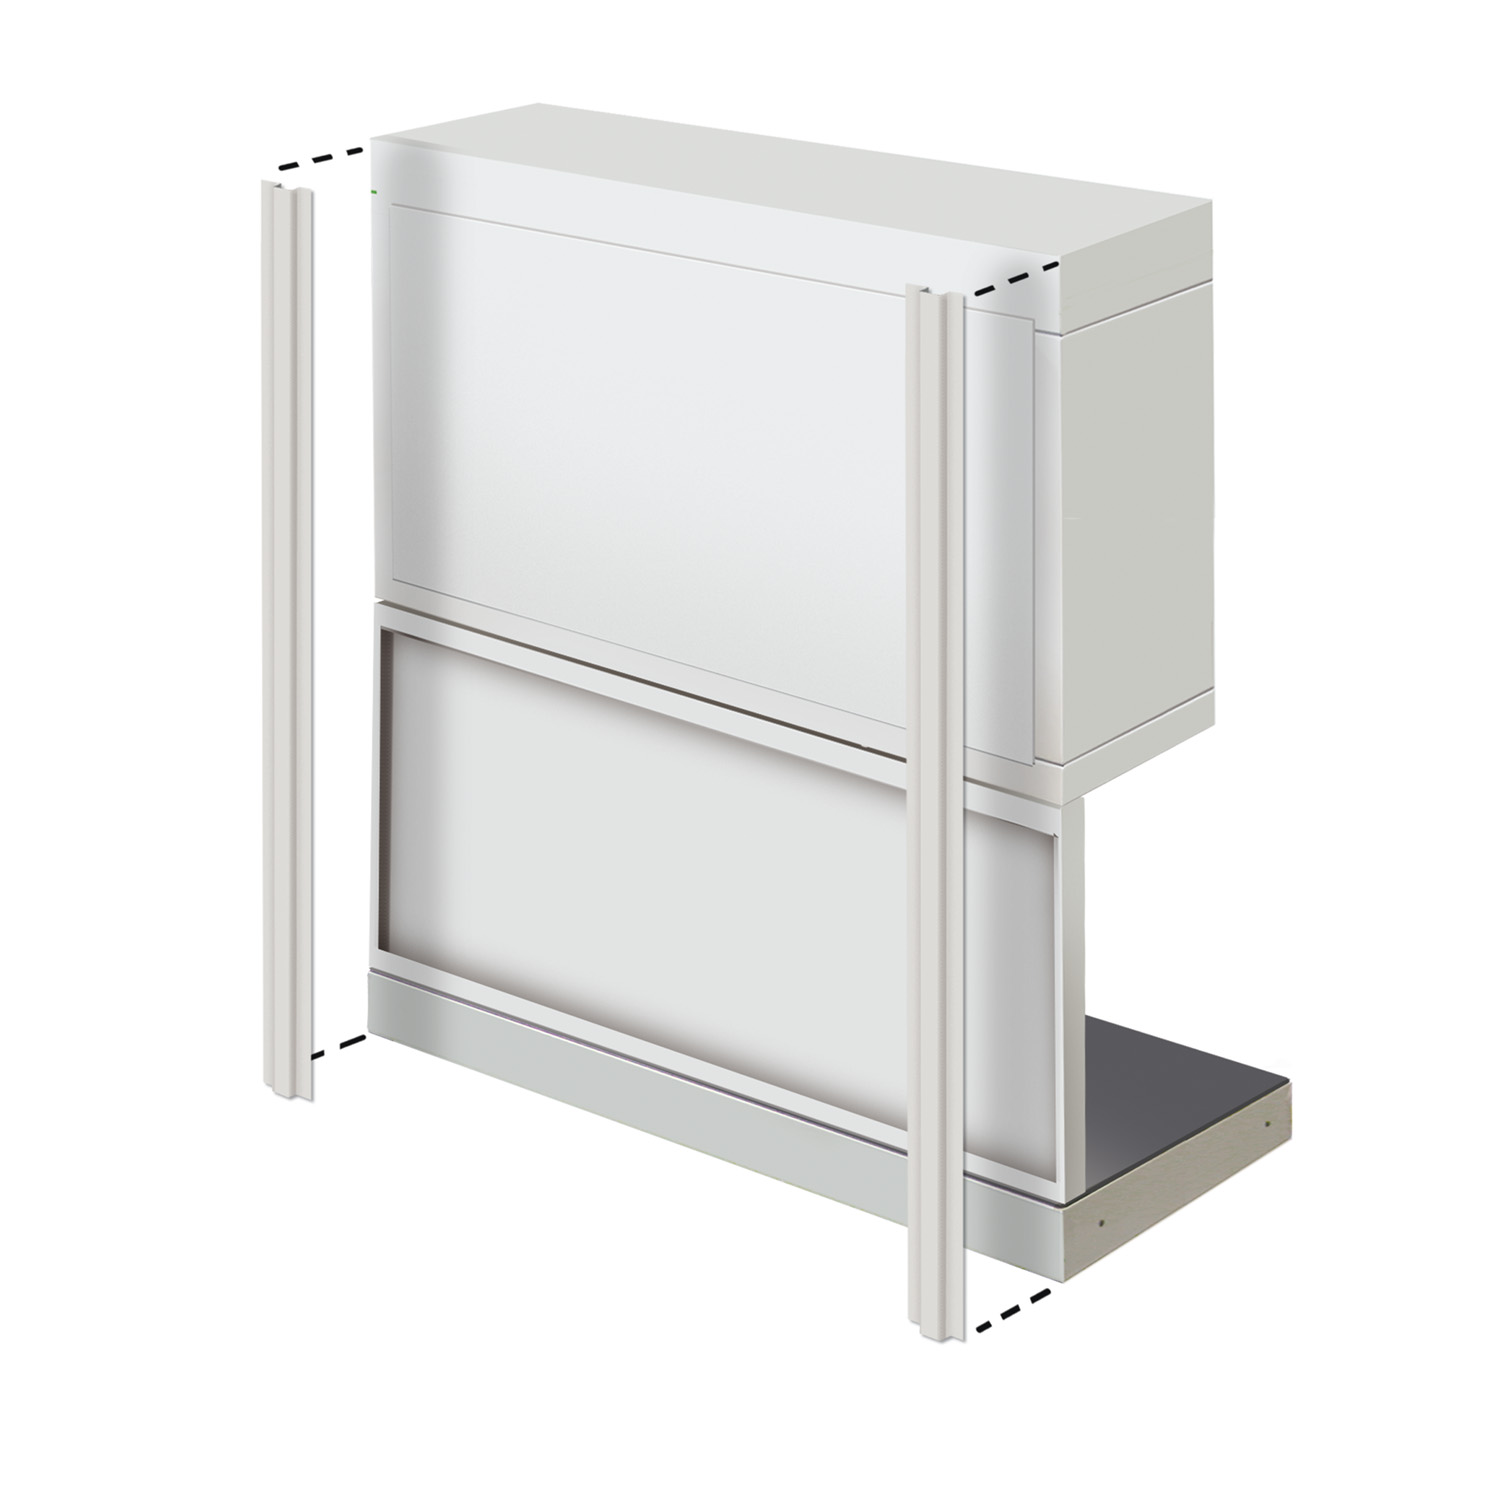 Backstraps x2 (for Wall Cab + 440mm Panel + Bridging or Bench)